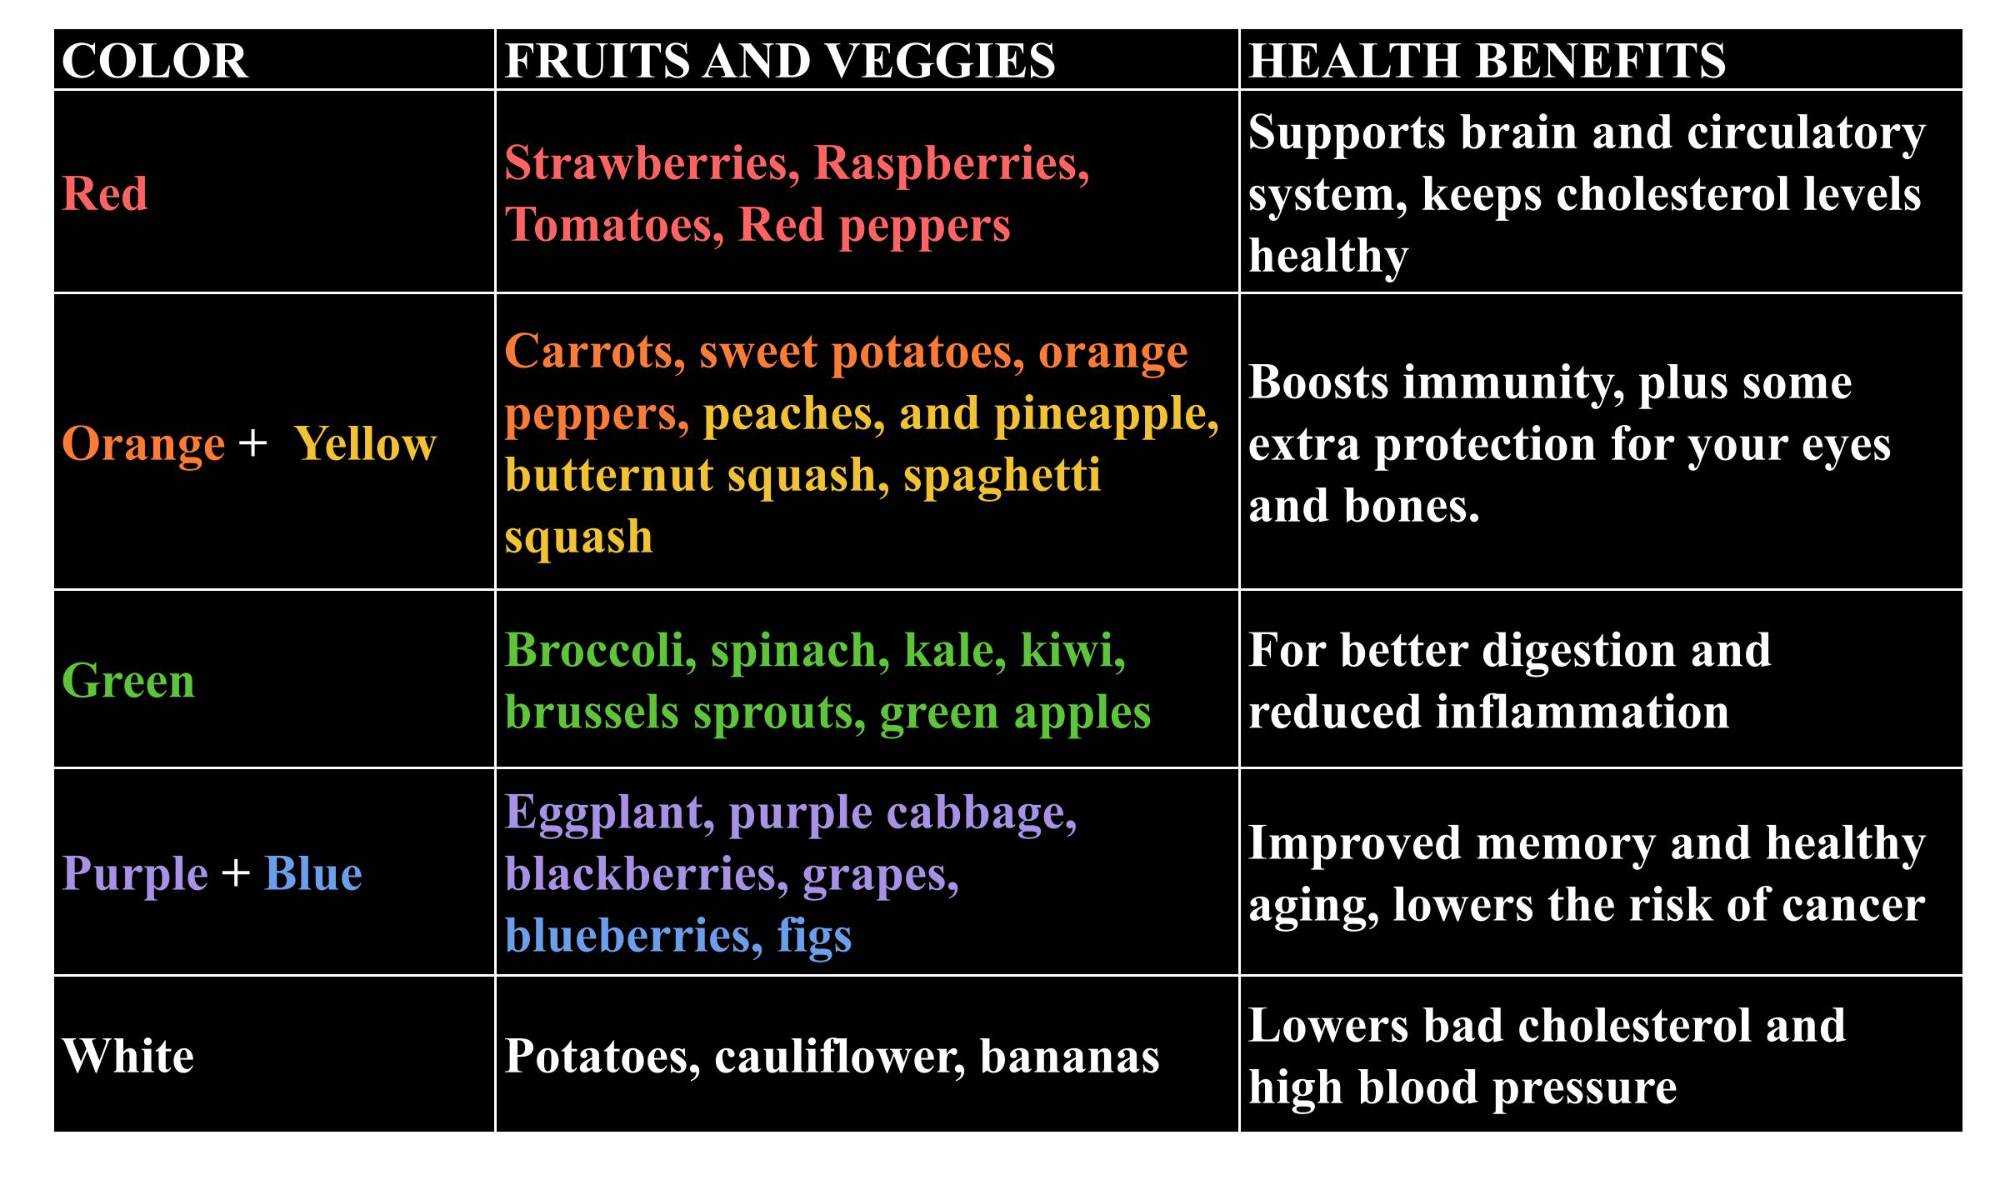 The same information provided earlier in the blog about nutrients of different colored fruits and vegetables, in table format